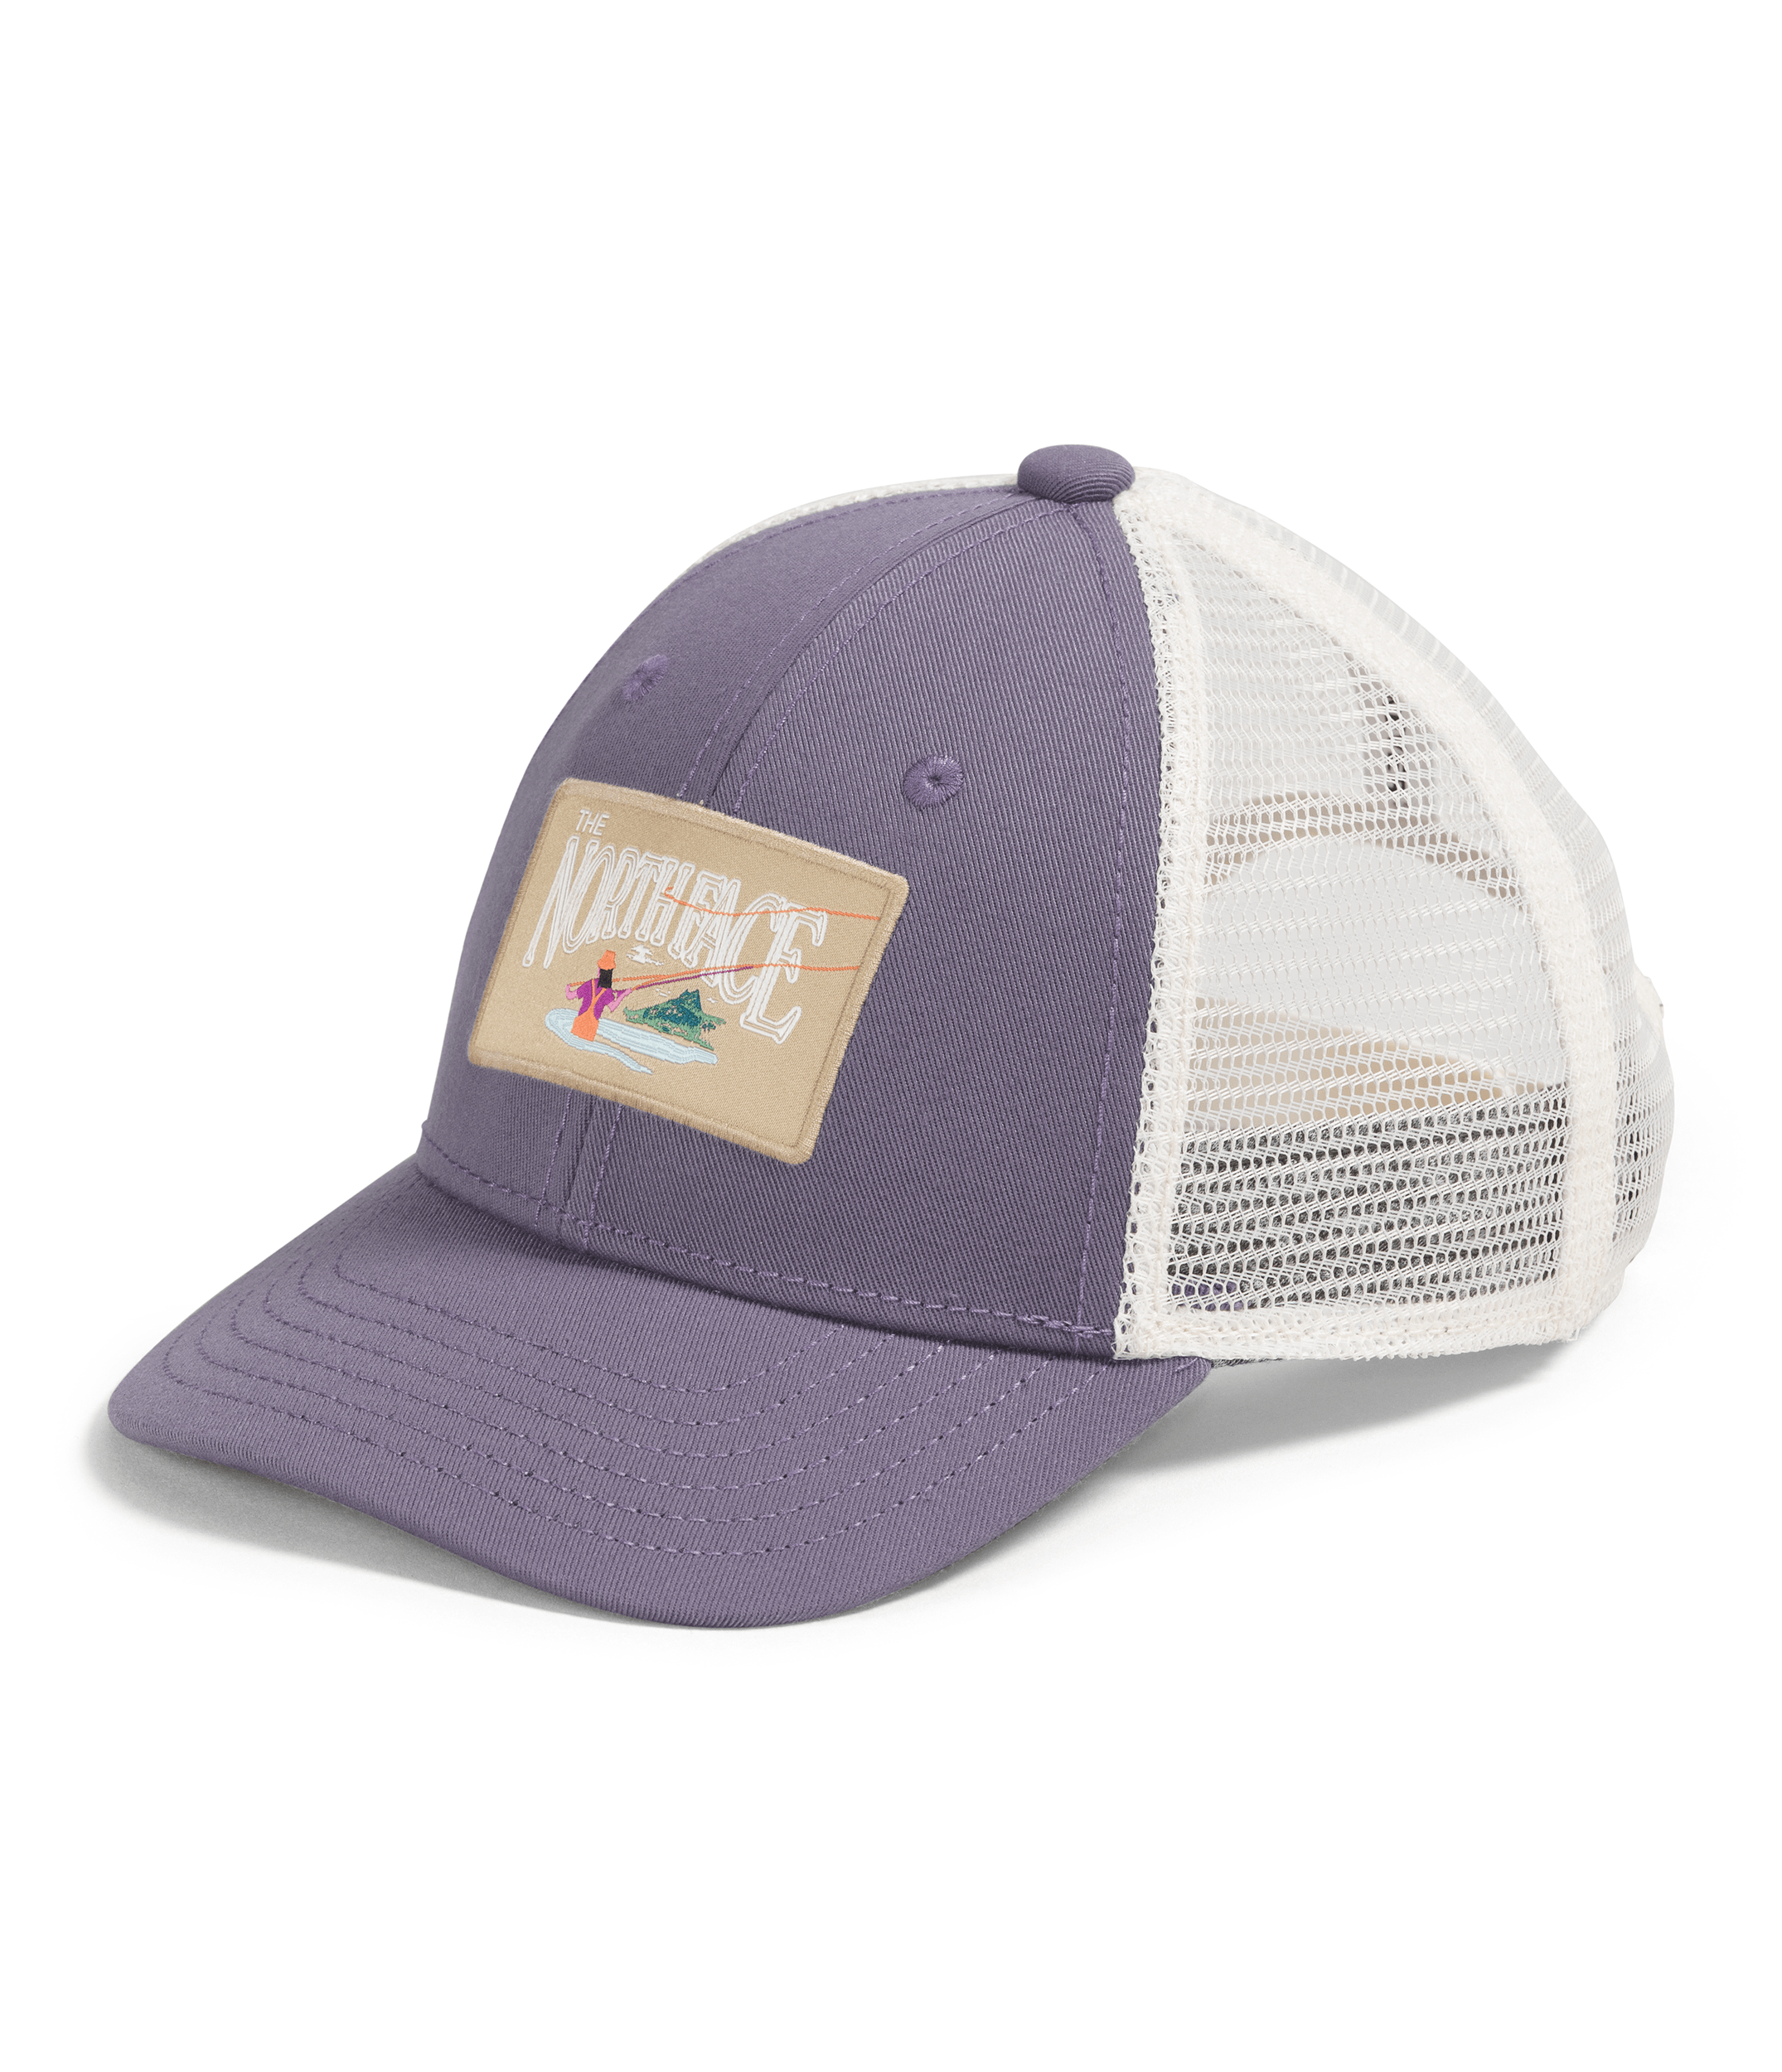 The North Face Kids' Mudder Trucker - Mountain Kids Outfitters: Lunar Slate / Graphic Patch Color - White Background front view